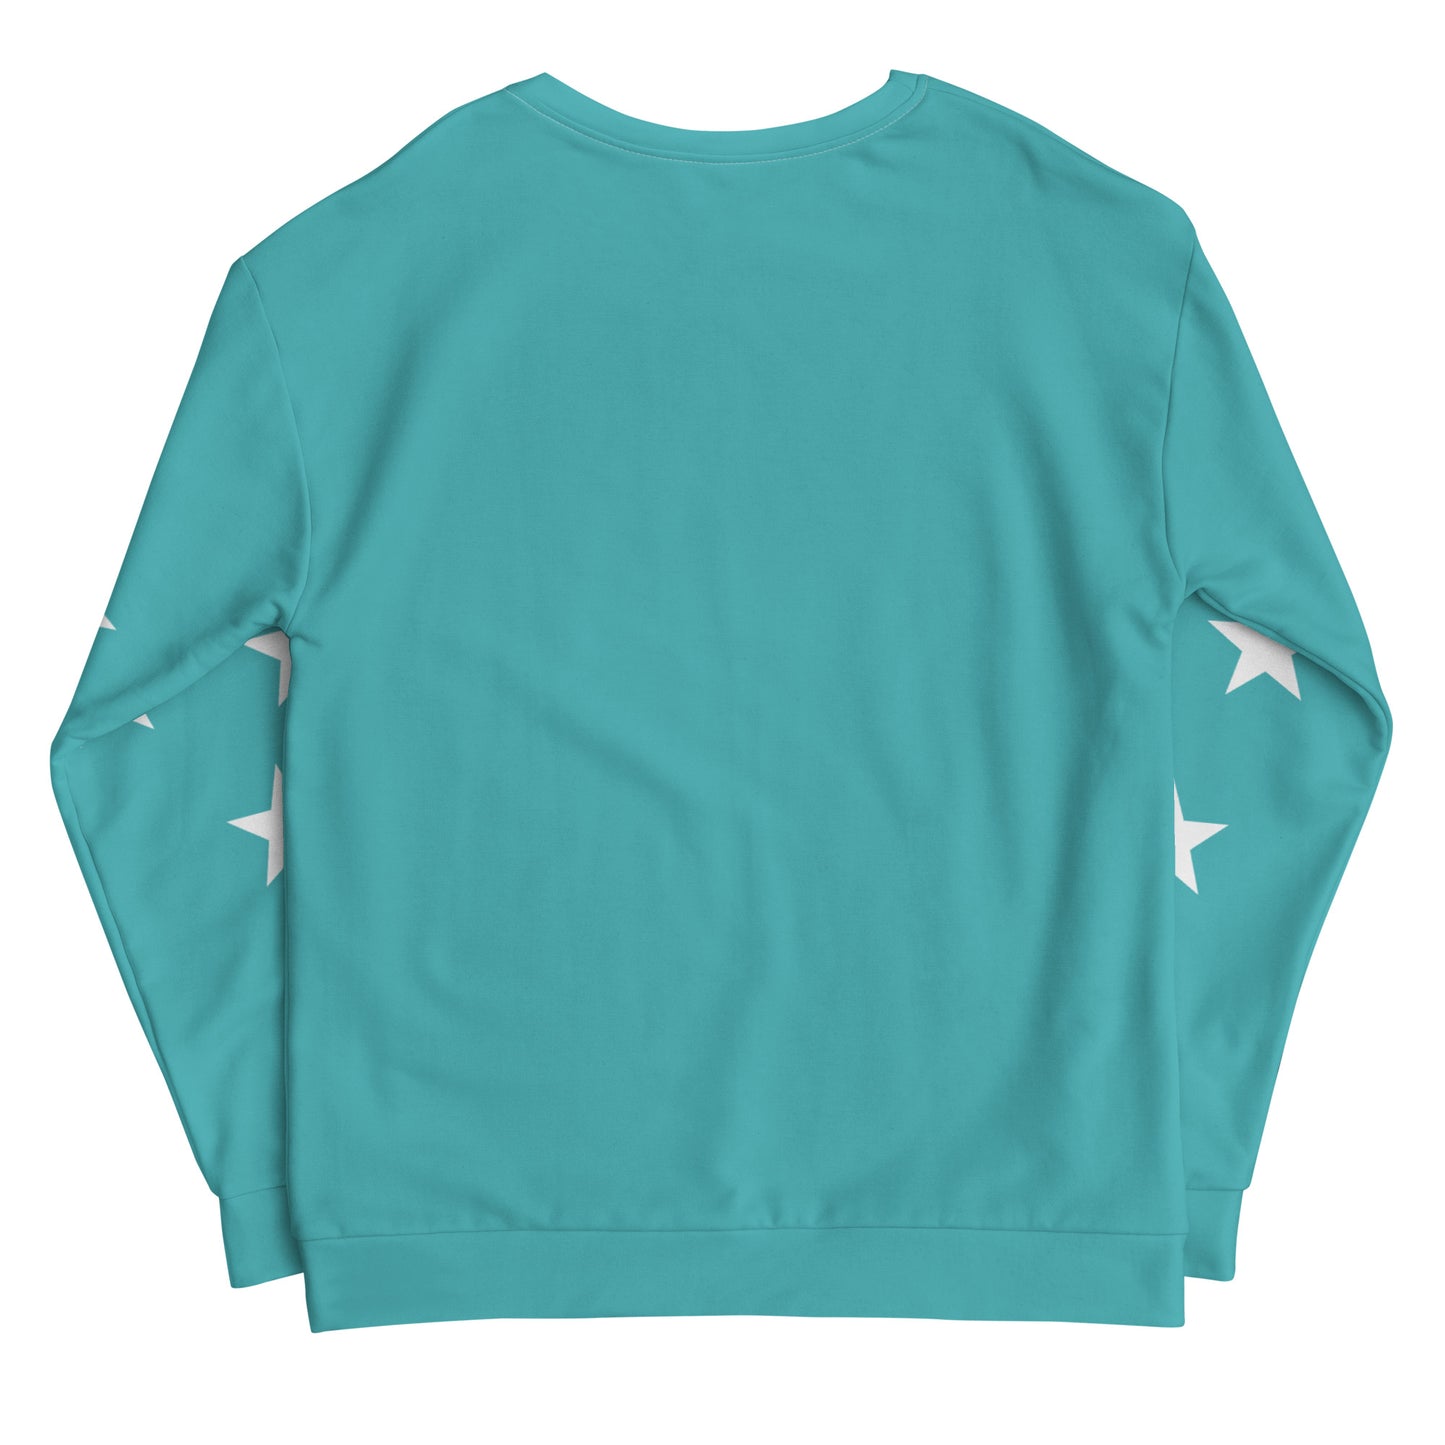 Starry - Inspired By Taylor Swift - Sustainably Made Sweatshirt